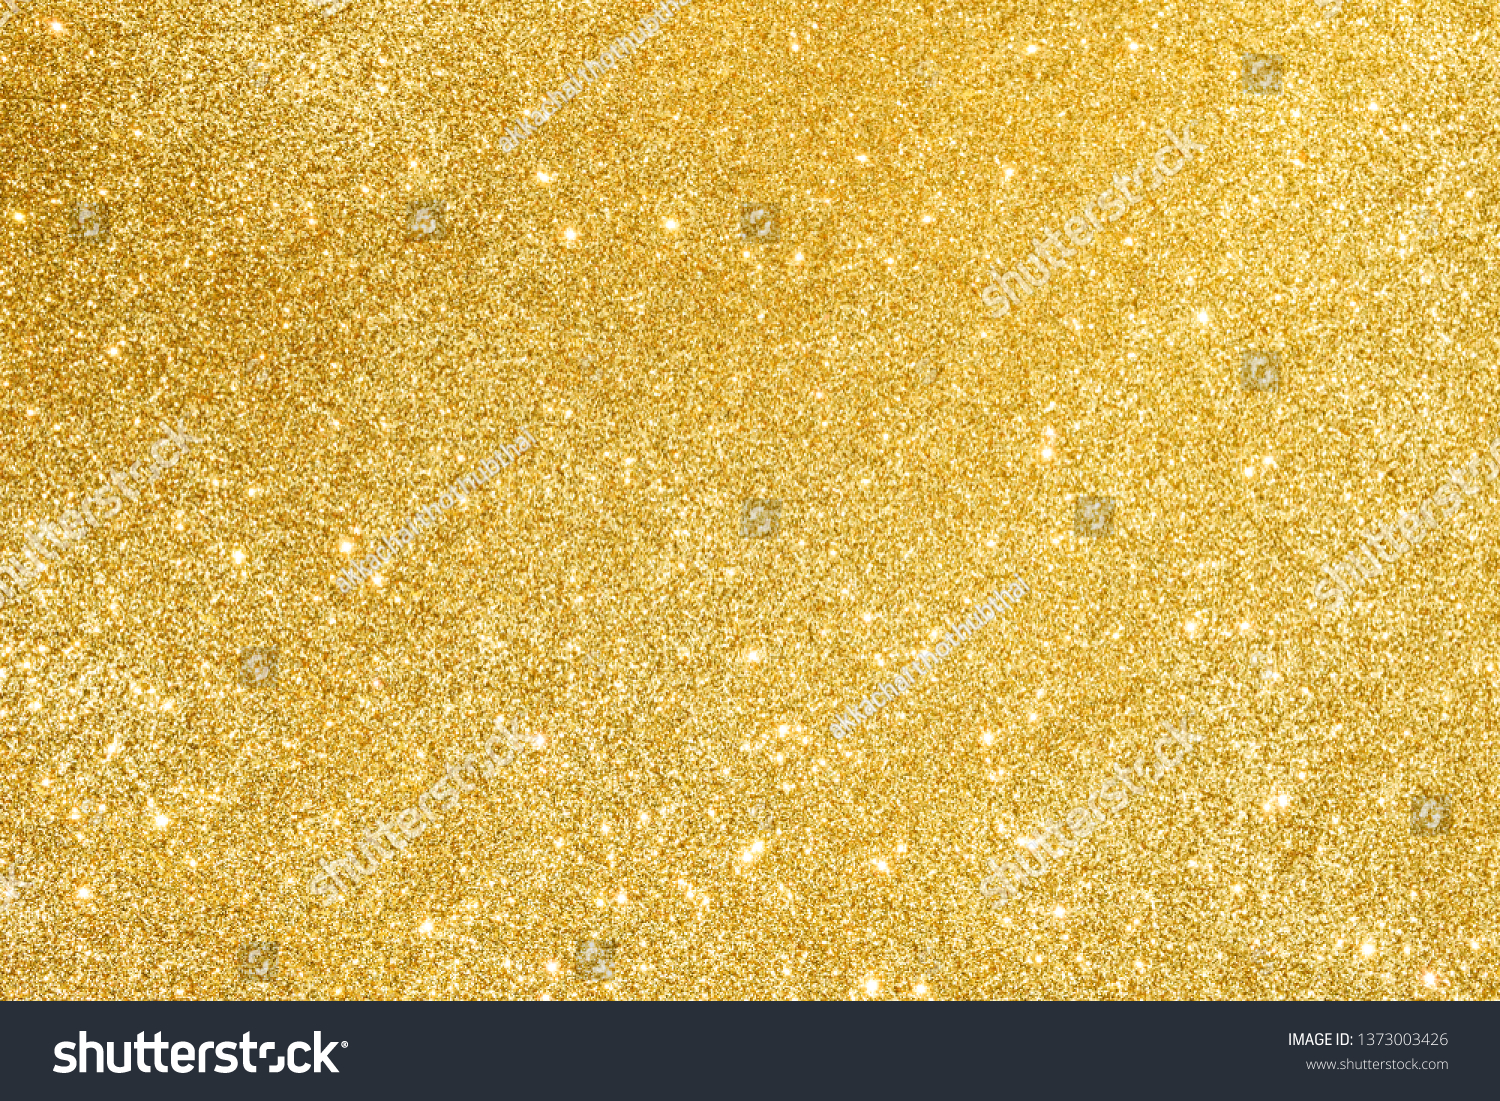 sparkles of golden glitter abstract background #1373003426